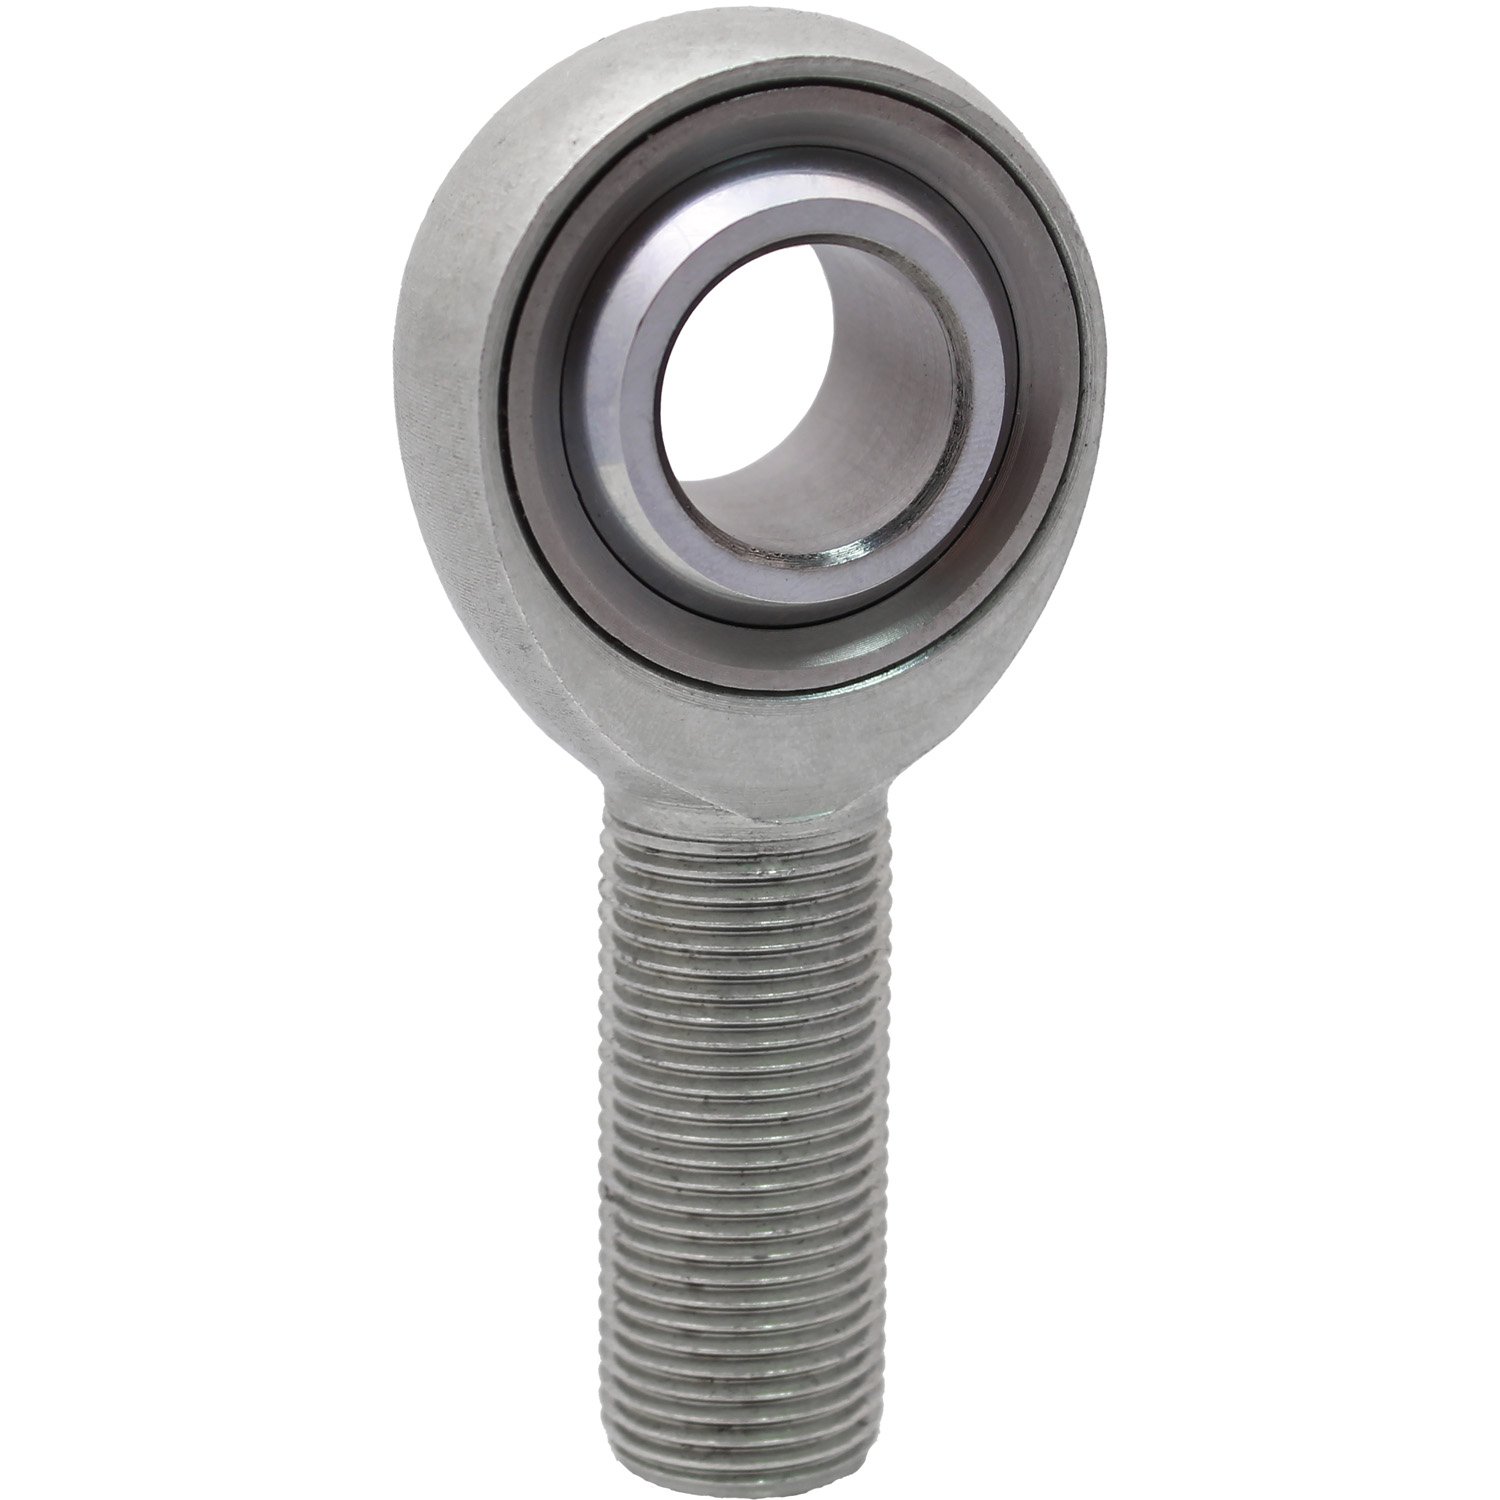 HM Series Rod End Hole I.D.: .4375 in.